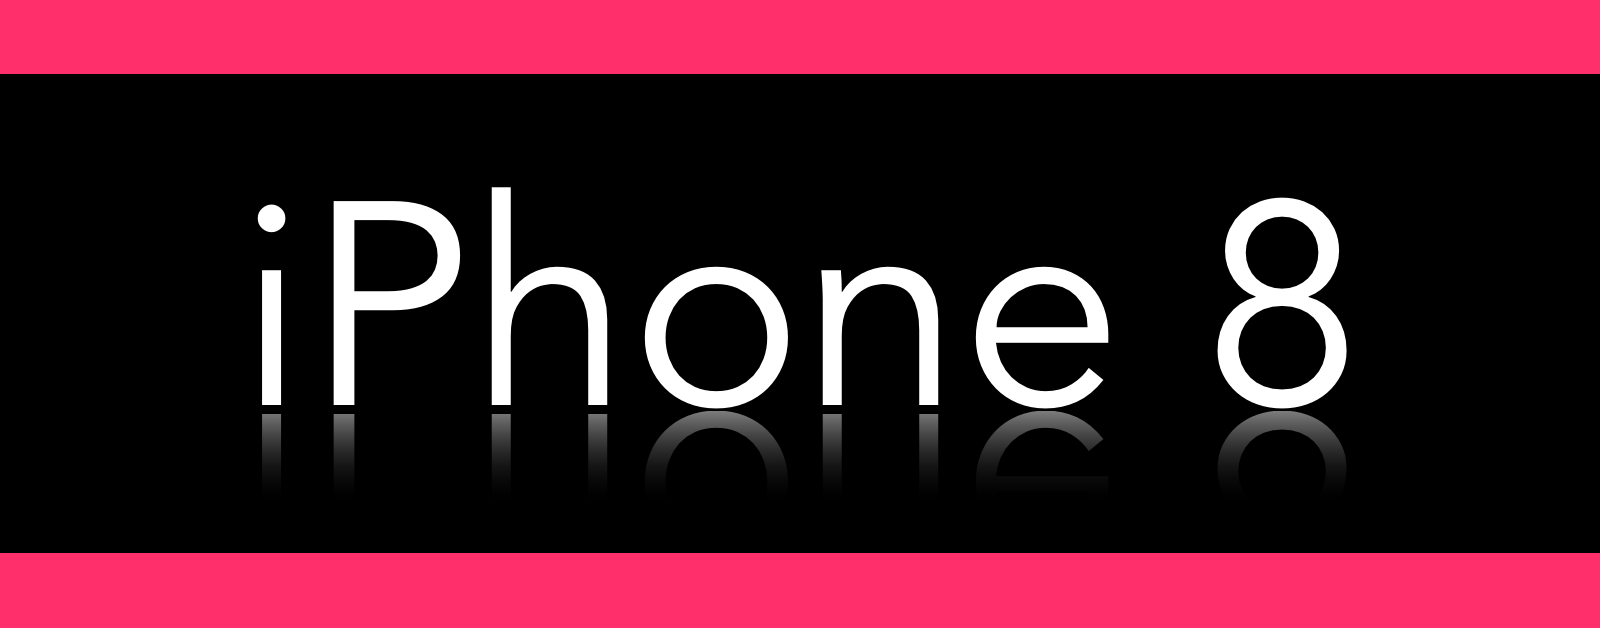 iPhone 8 Logo - A Bezel Less IPhone 8 Will Change How Photo Look Mac Observer